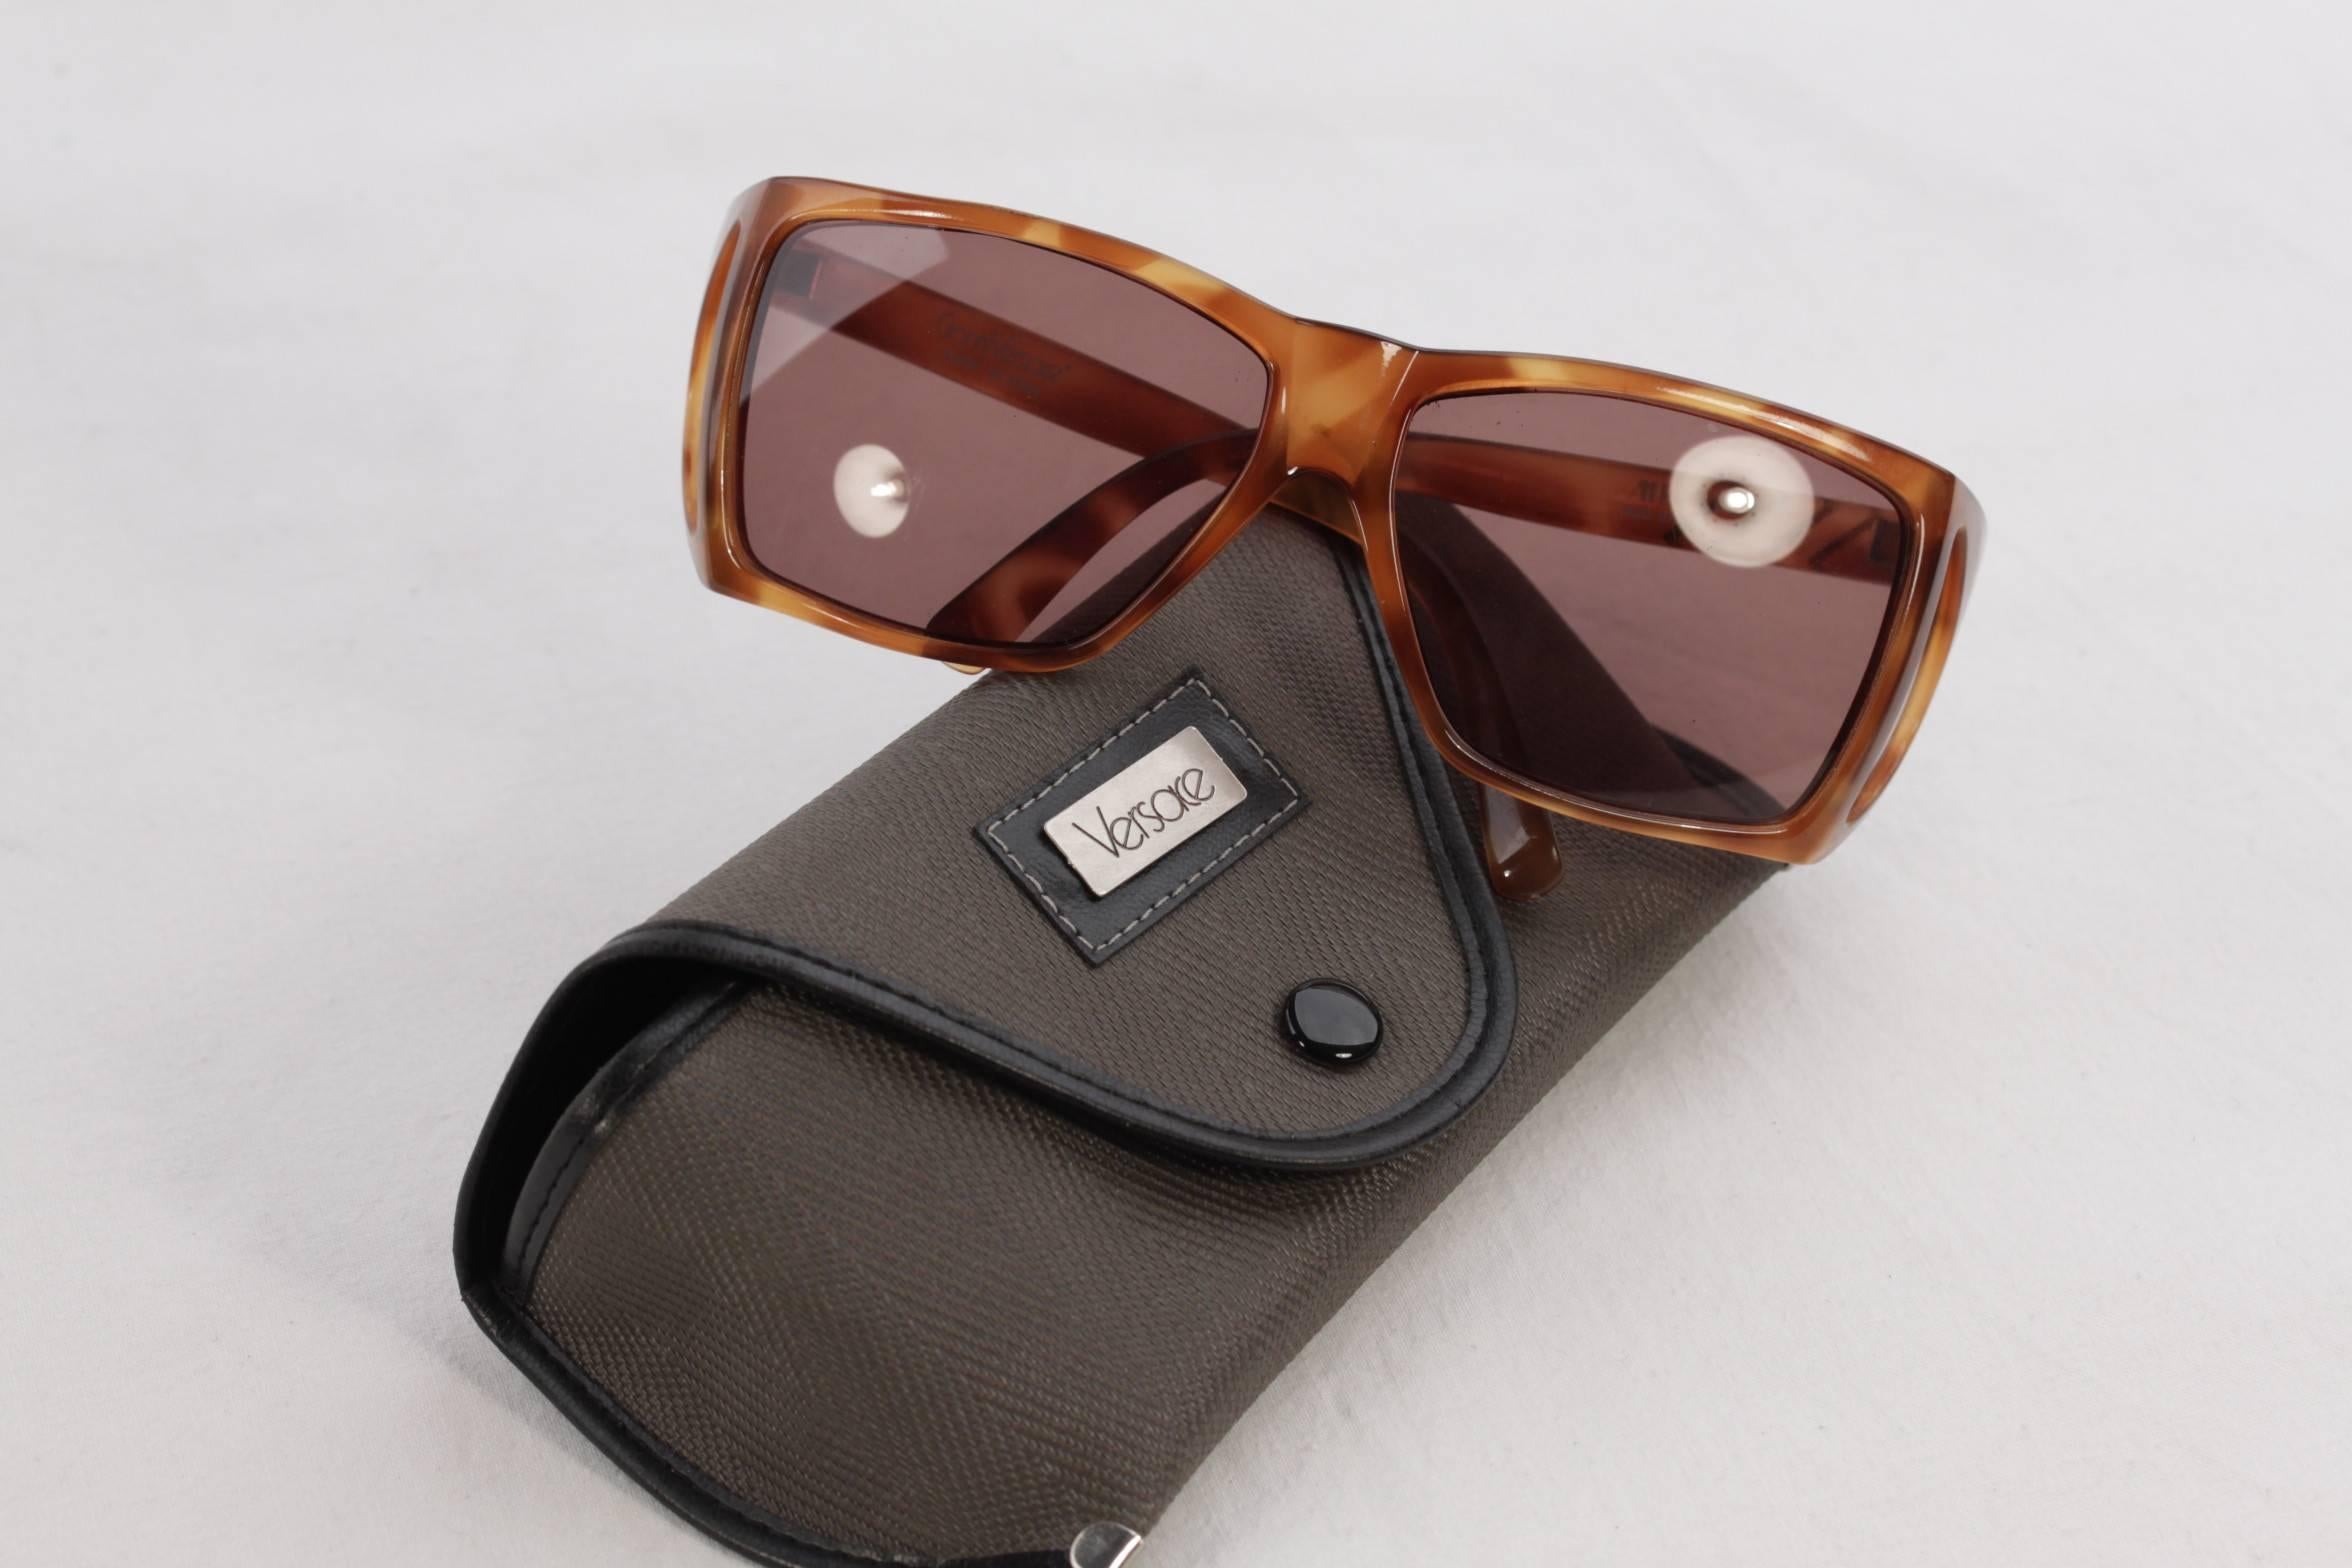 - Tan color acetate frame with silver color diagonal-lines on the left side.

- Two light brown lenses in rectangular shape on the front

- Two smaller light brown color lenses in triangular shape on the side-edges

- Made in Italy in the late